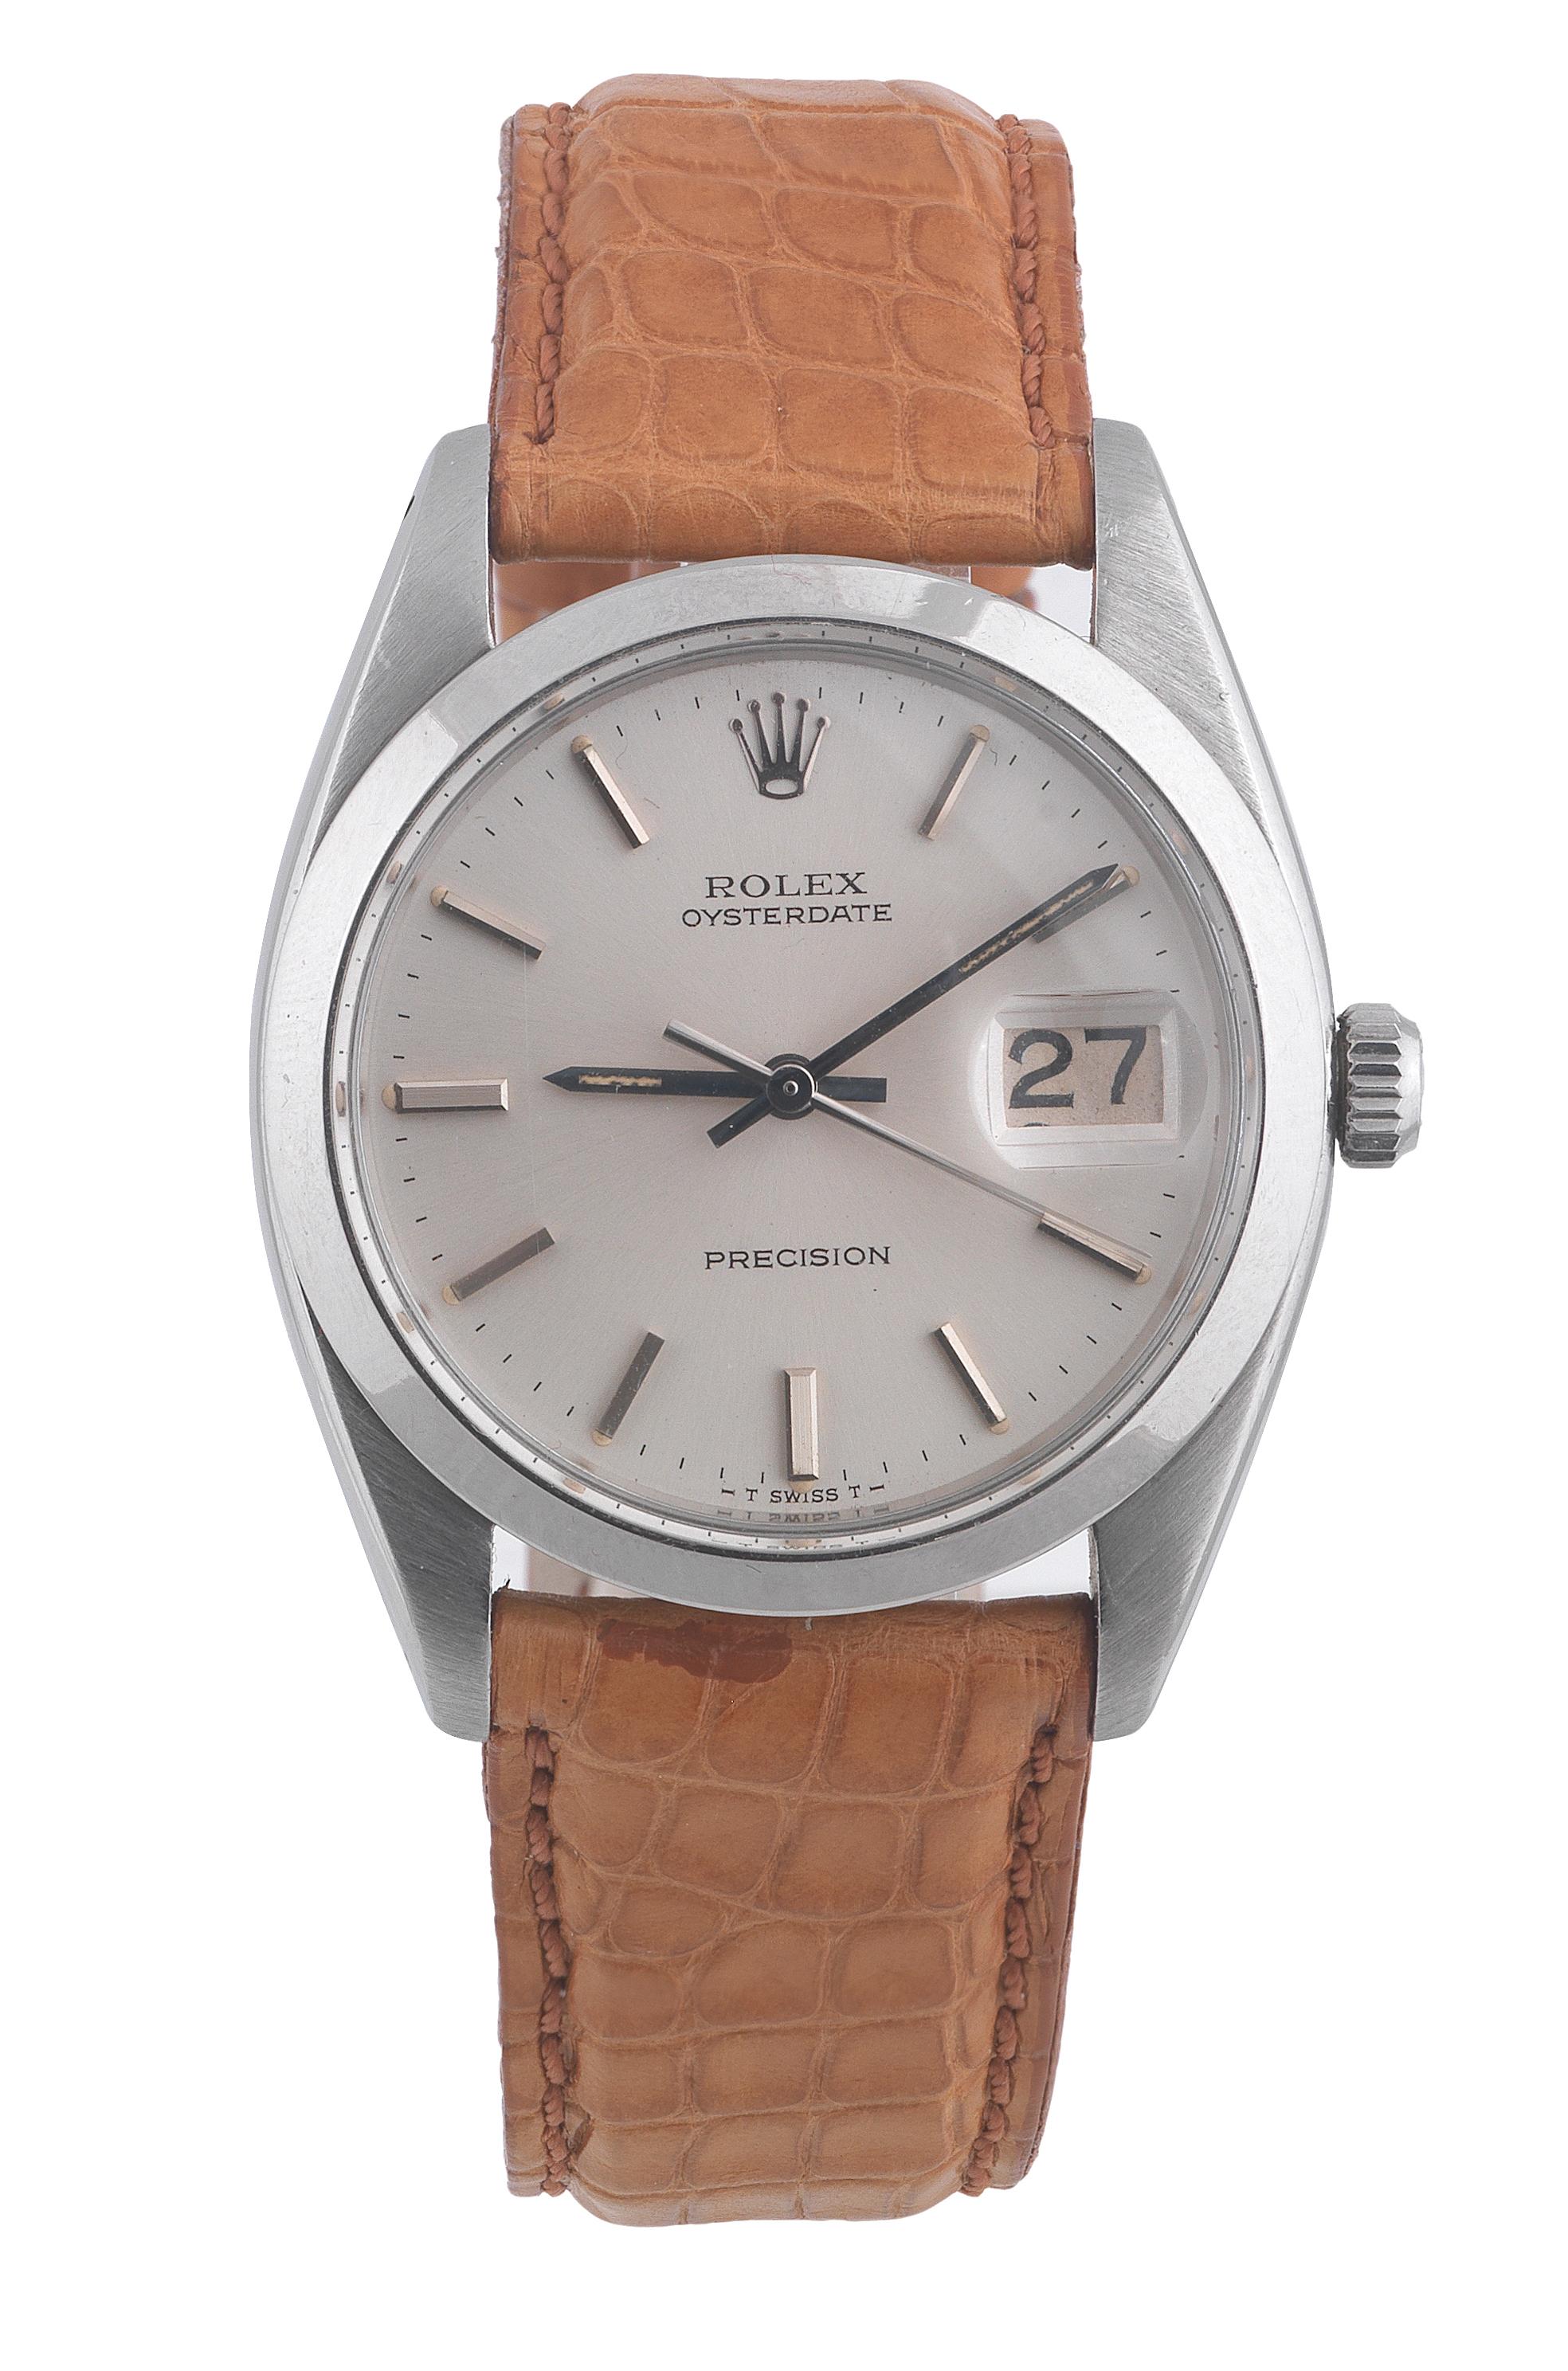 Contemporary Rolex Ref. 6694 Oysterdate Precision Stainless Steel